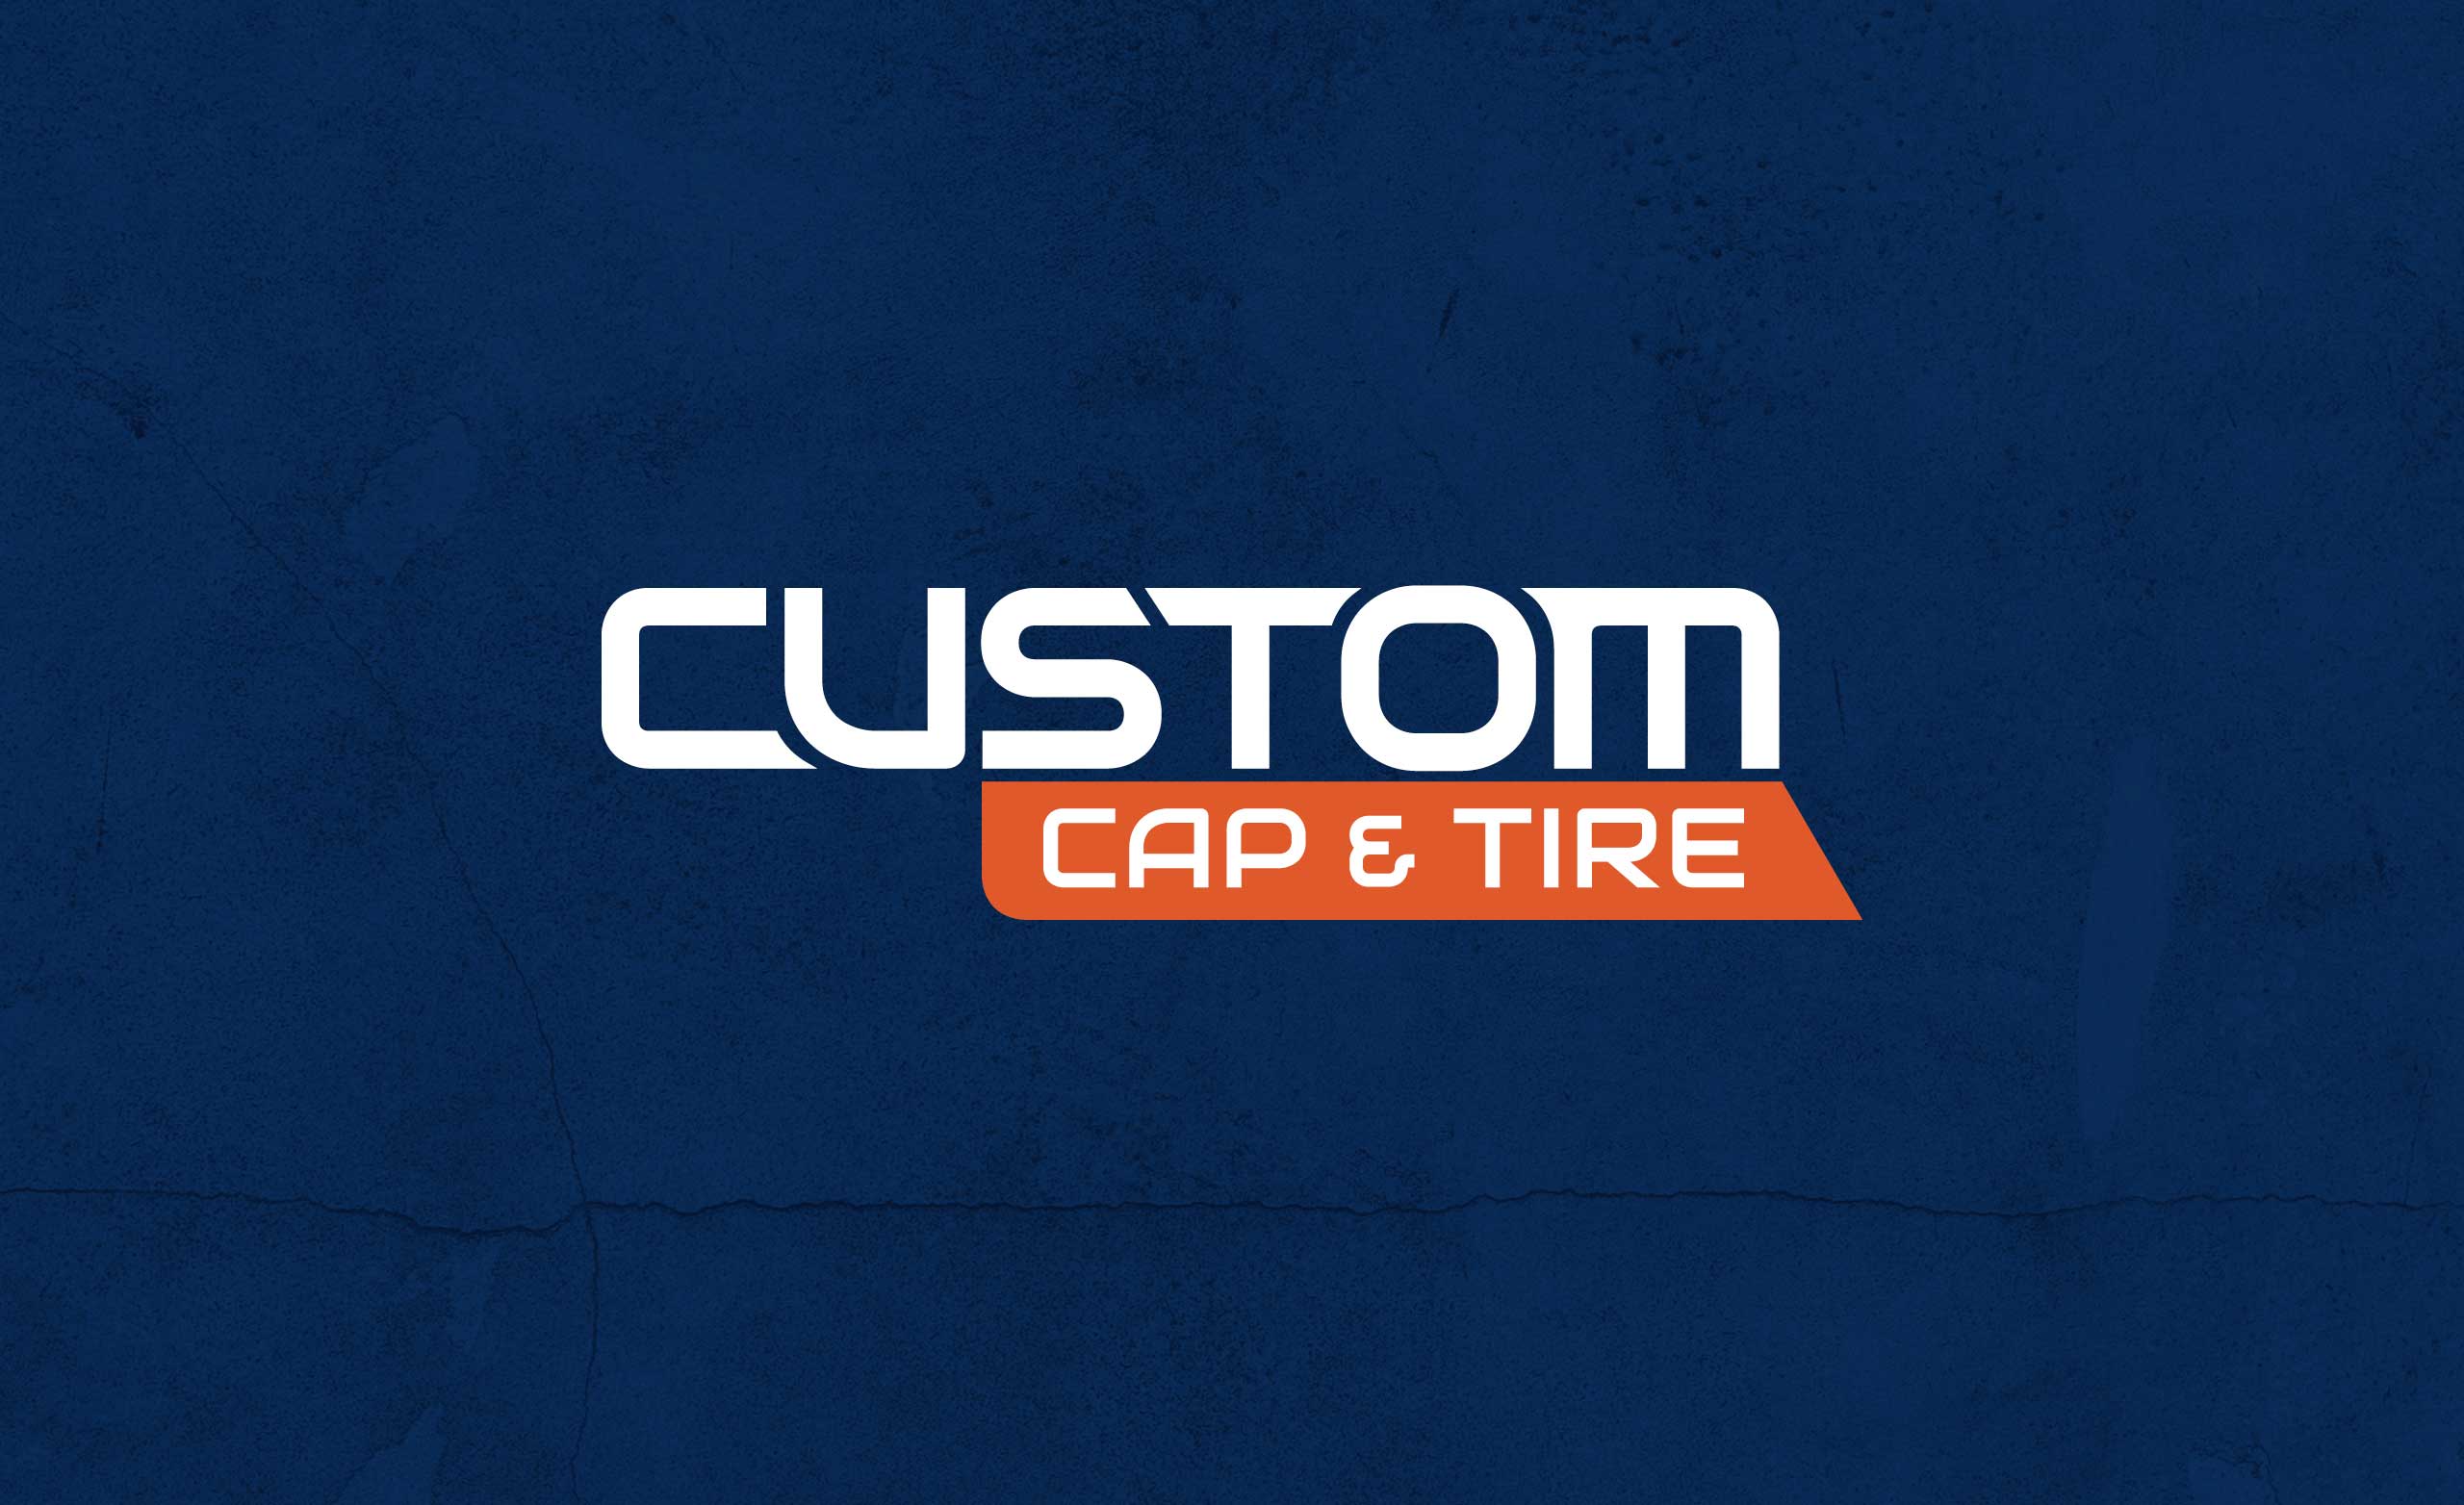 The Custom Cap and Tire logo, over a dark blue background.